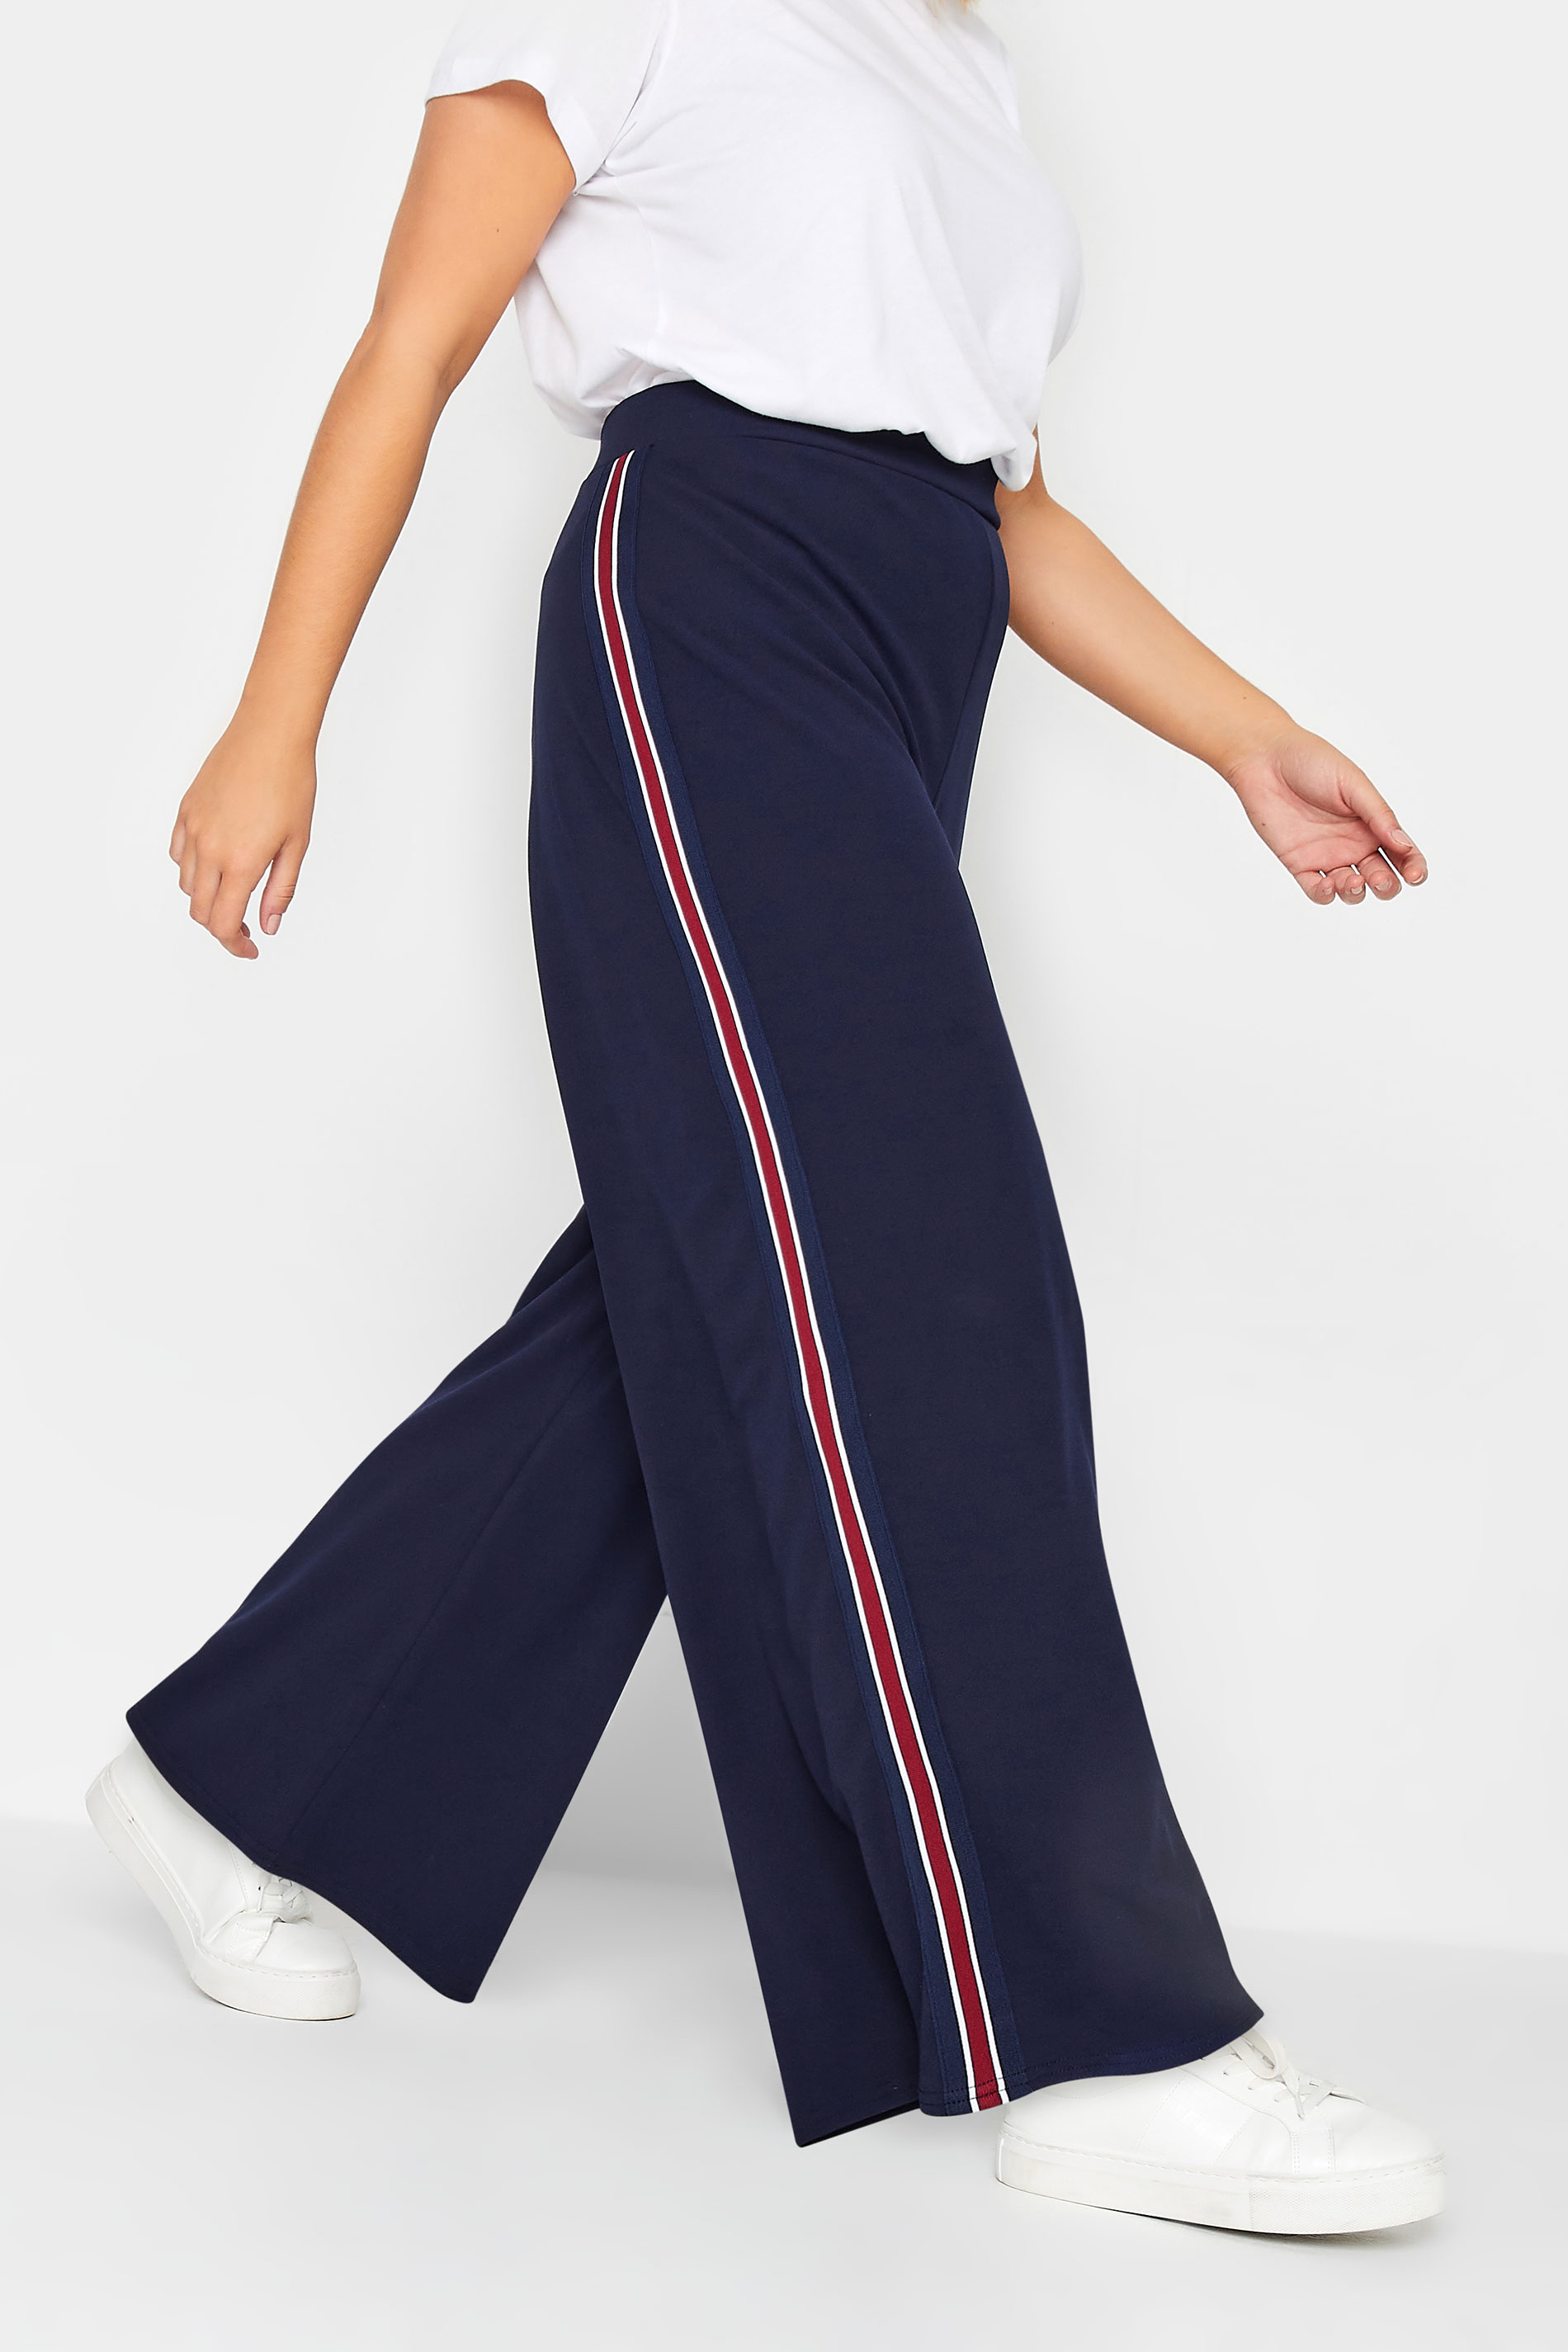 YOURS PETITE Plus Size Navy Blue Block Stripe Wide Leg Trousers | Yours Clothing 1